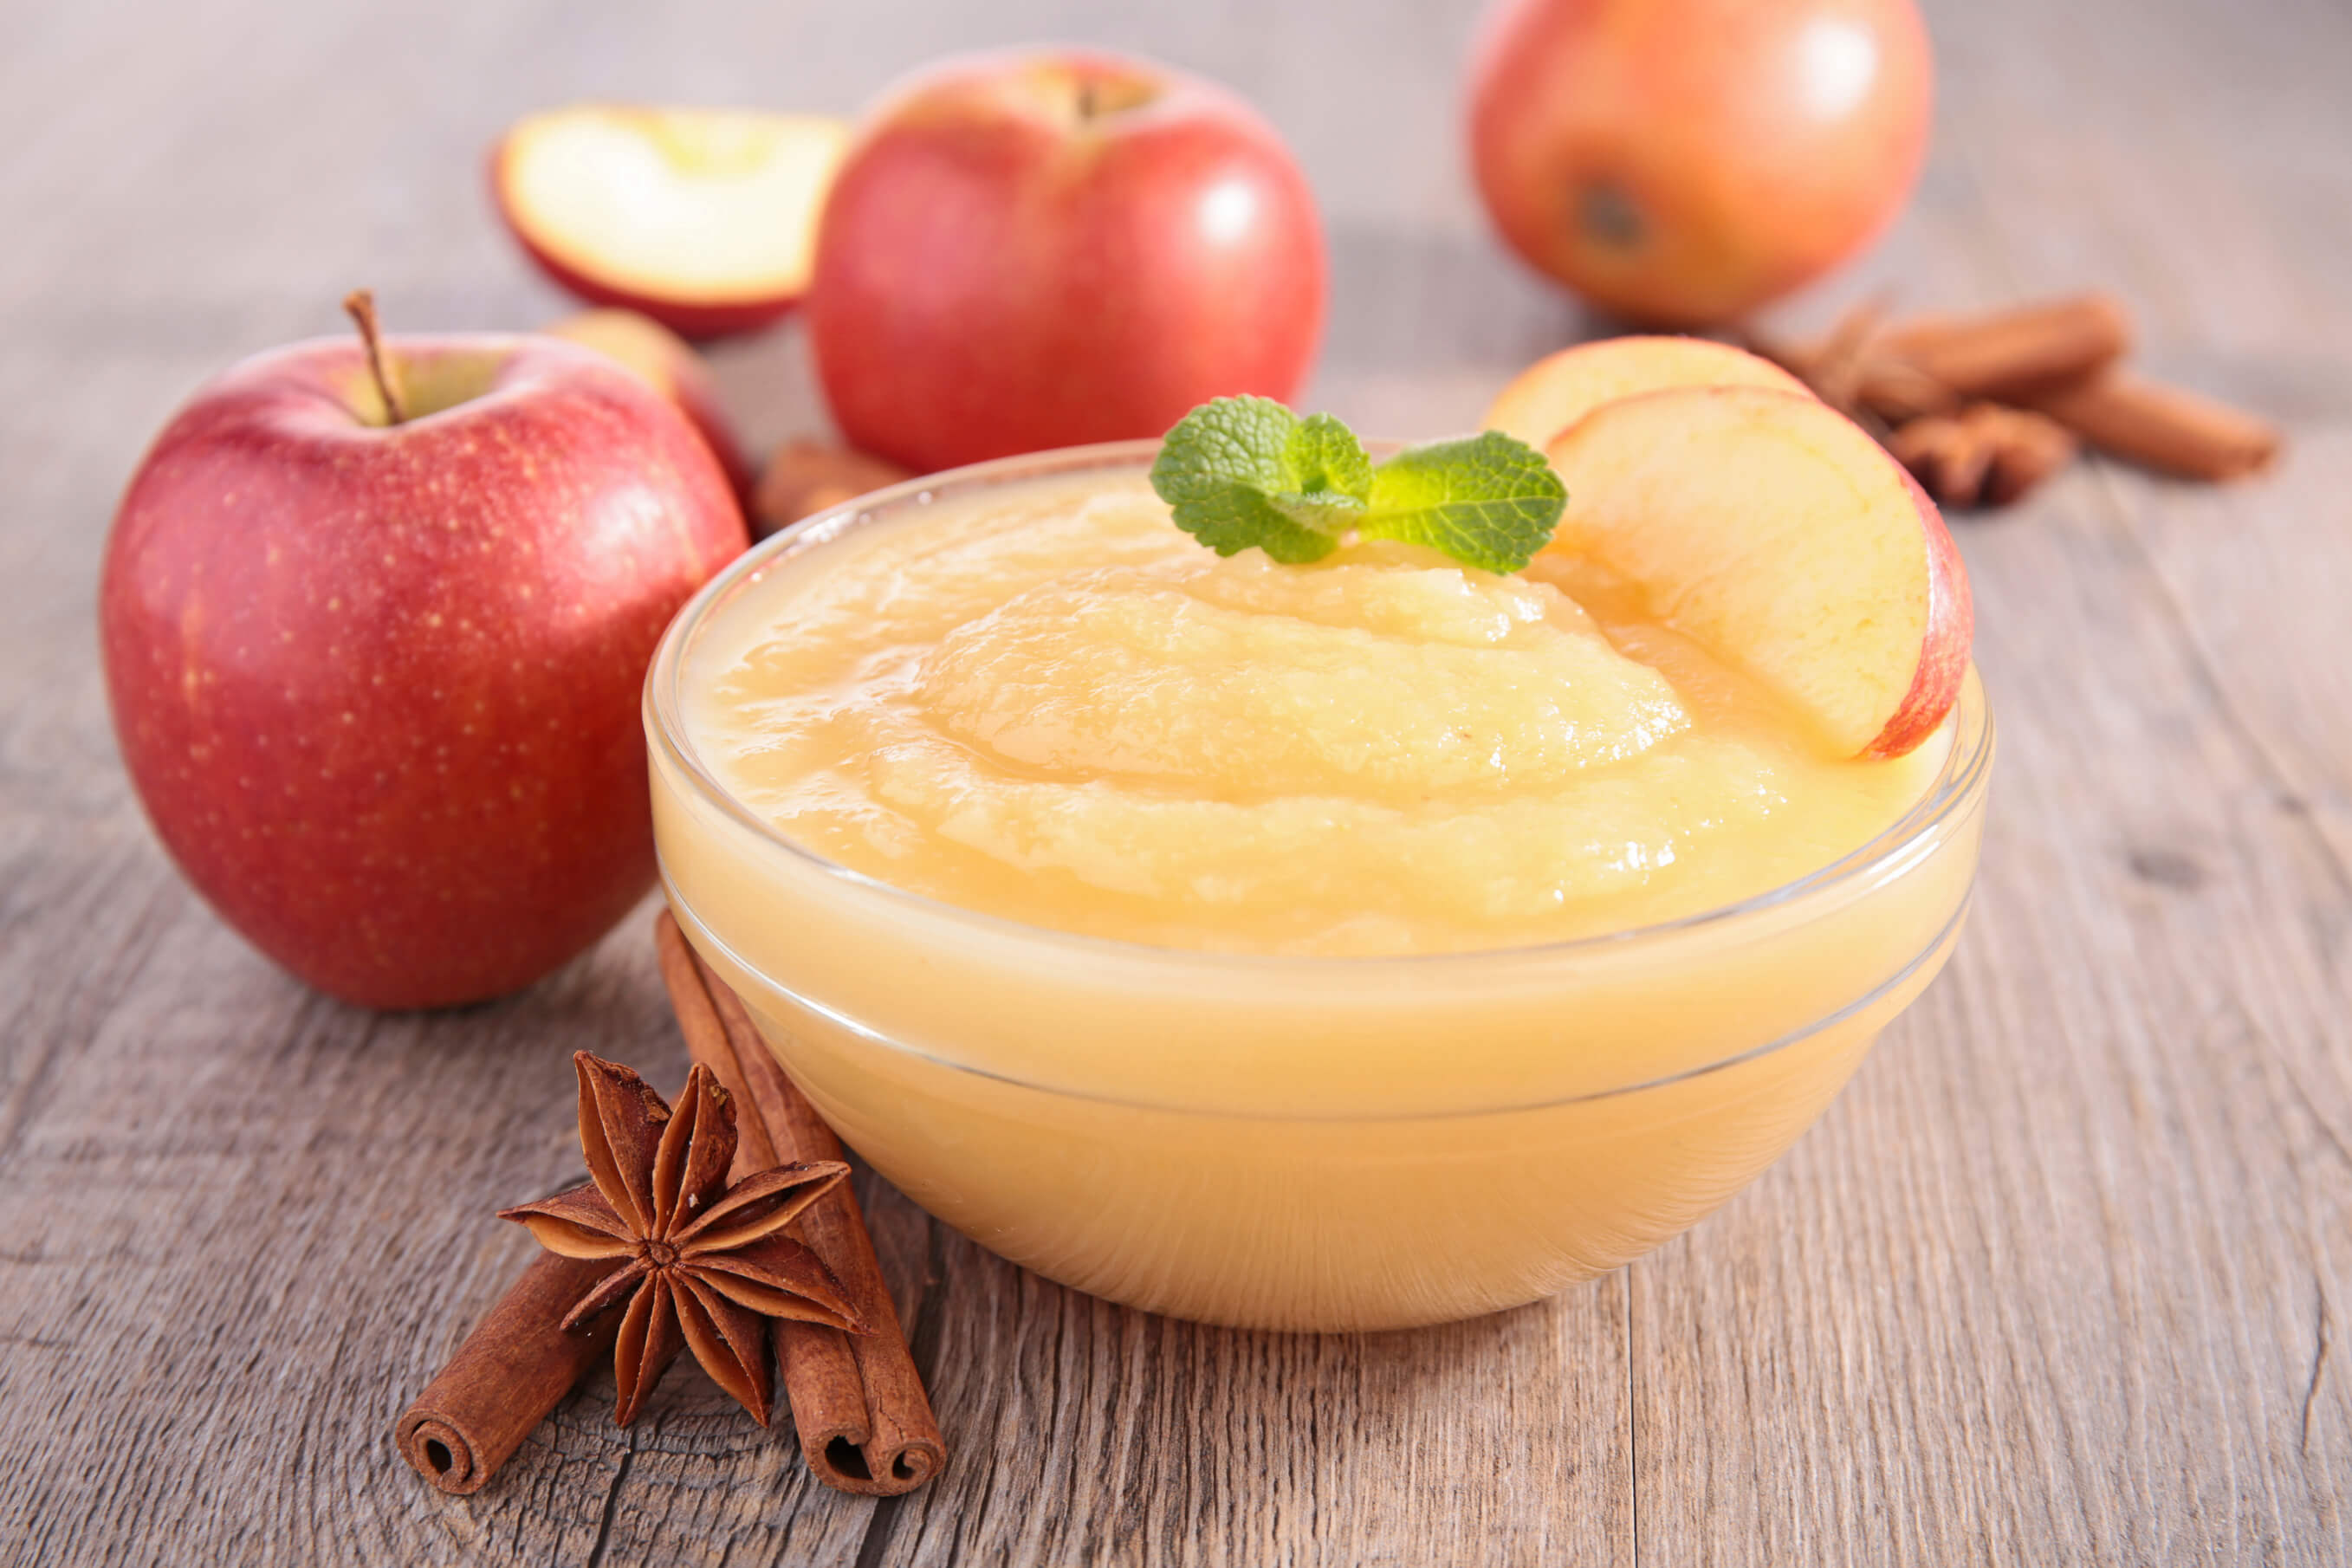 Best Apples for Making Unsweetened Applesauce | Apple for That